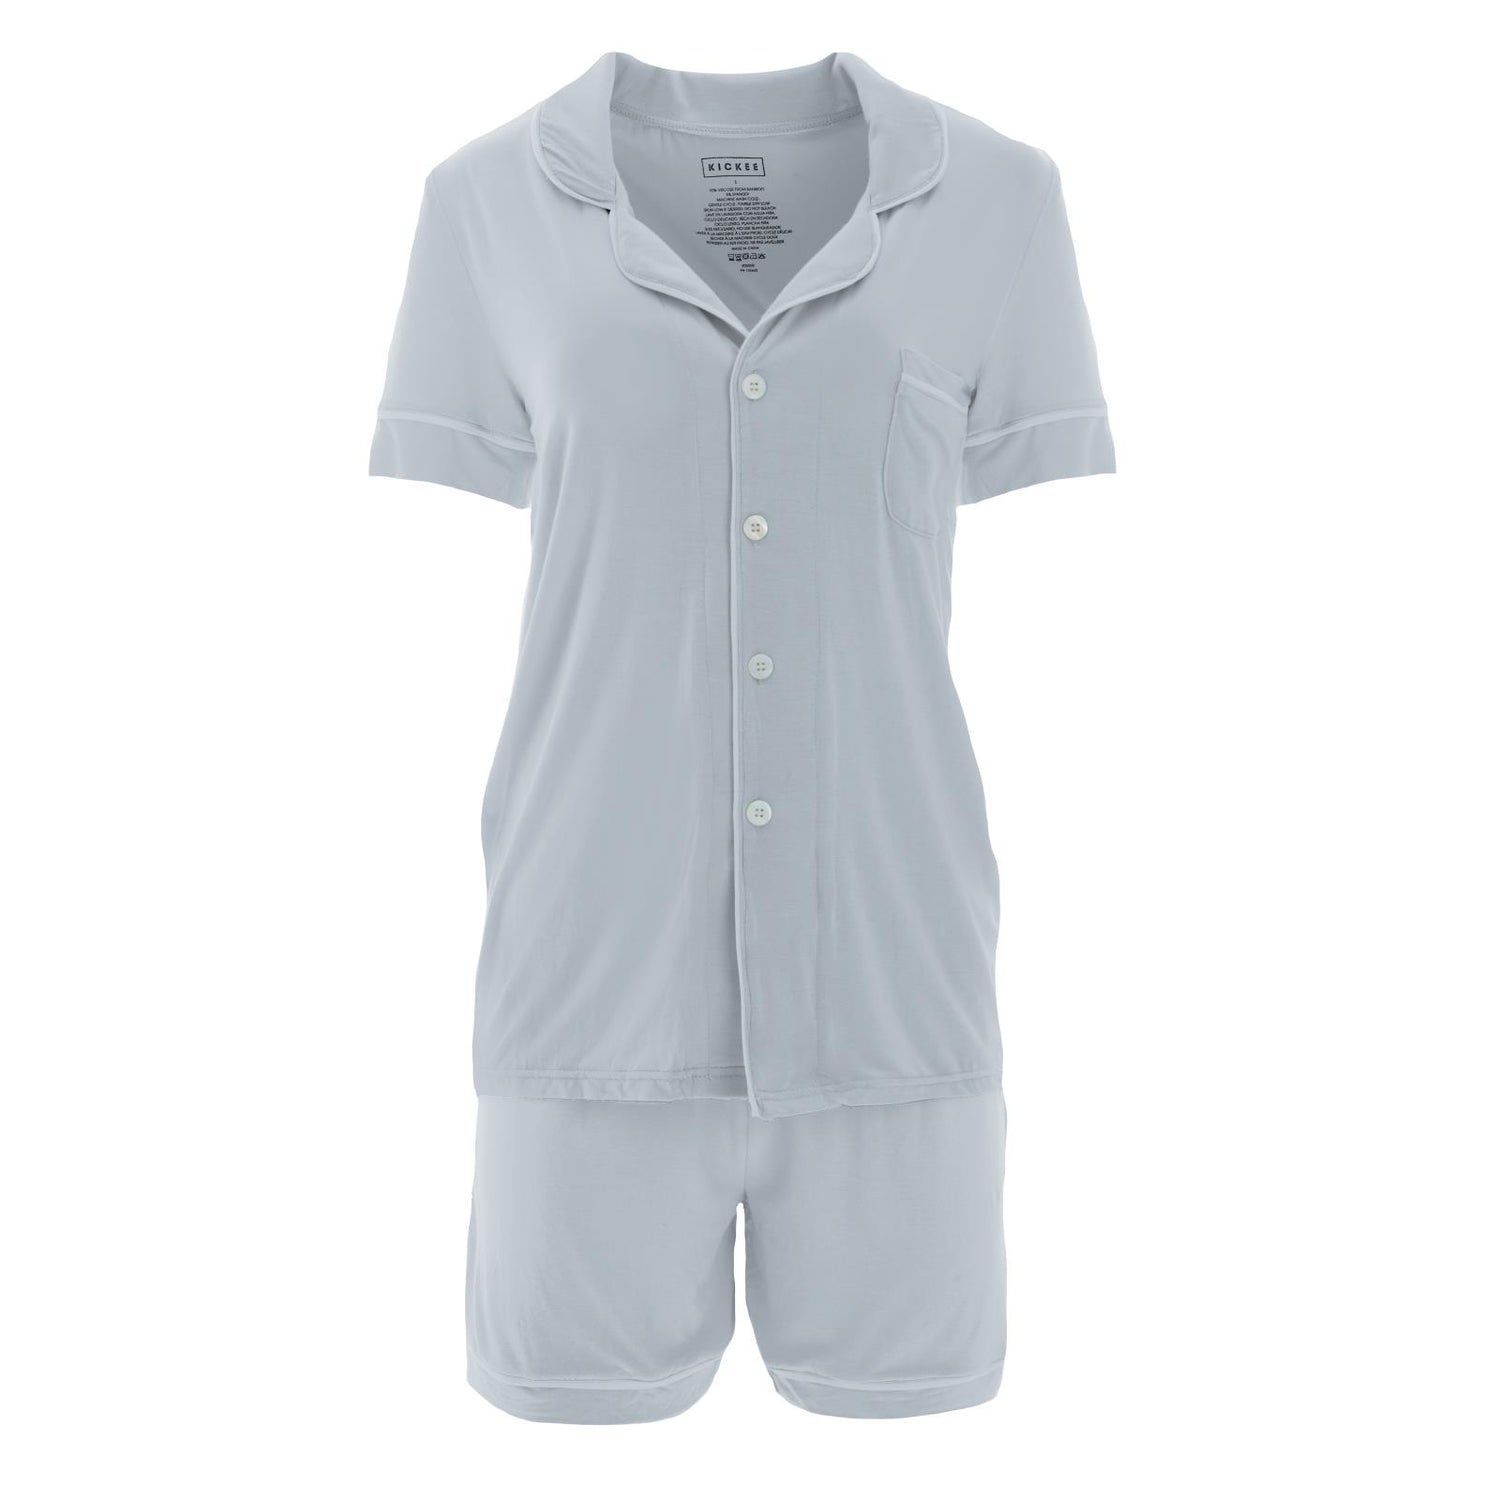 Women's Short Sleeve Collared Pajama Set with Shorts in Pearl Blue